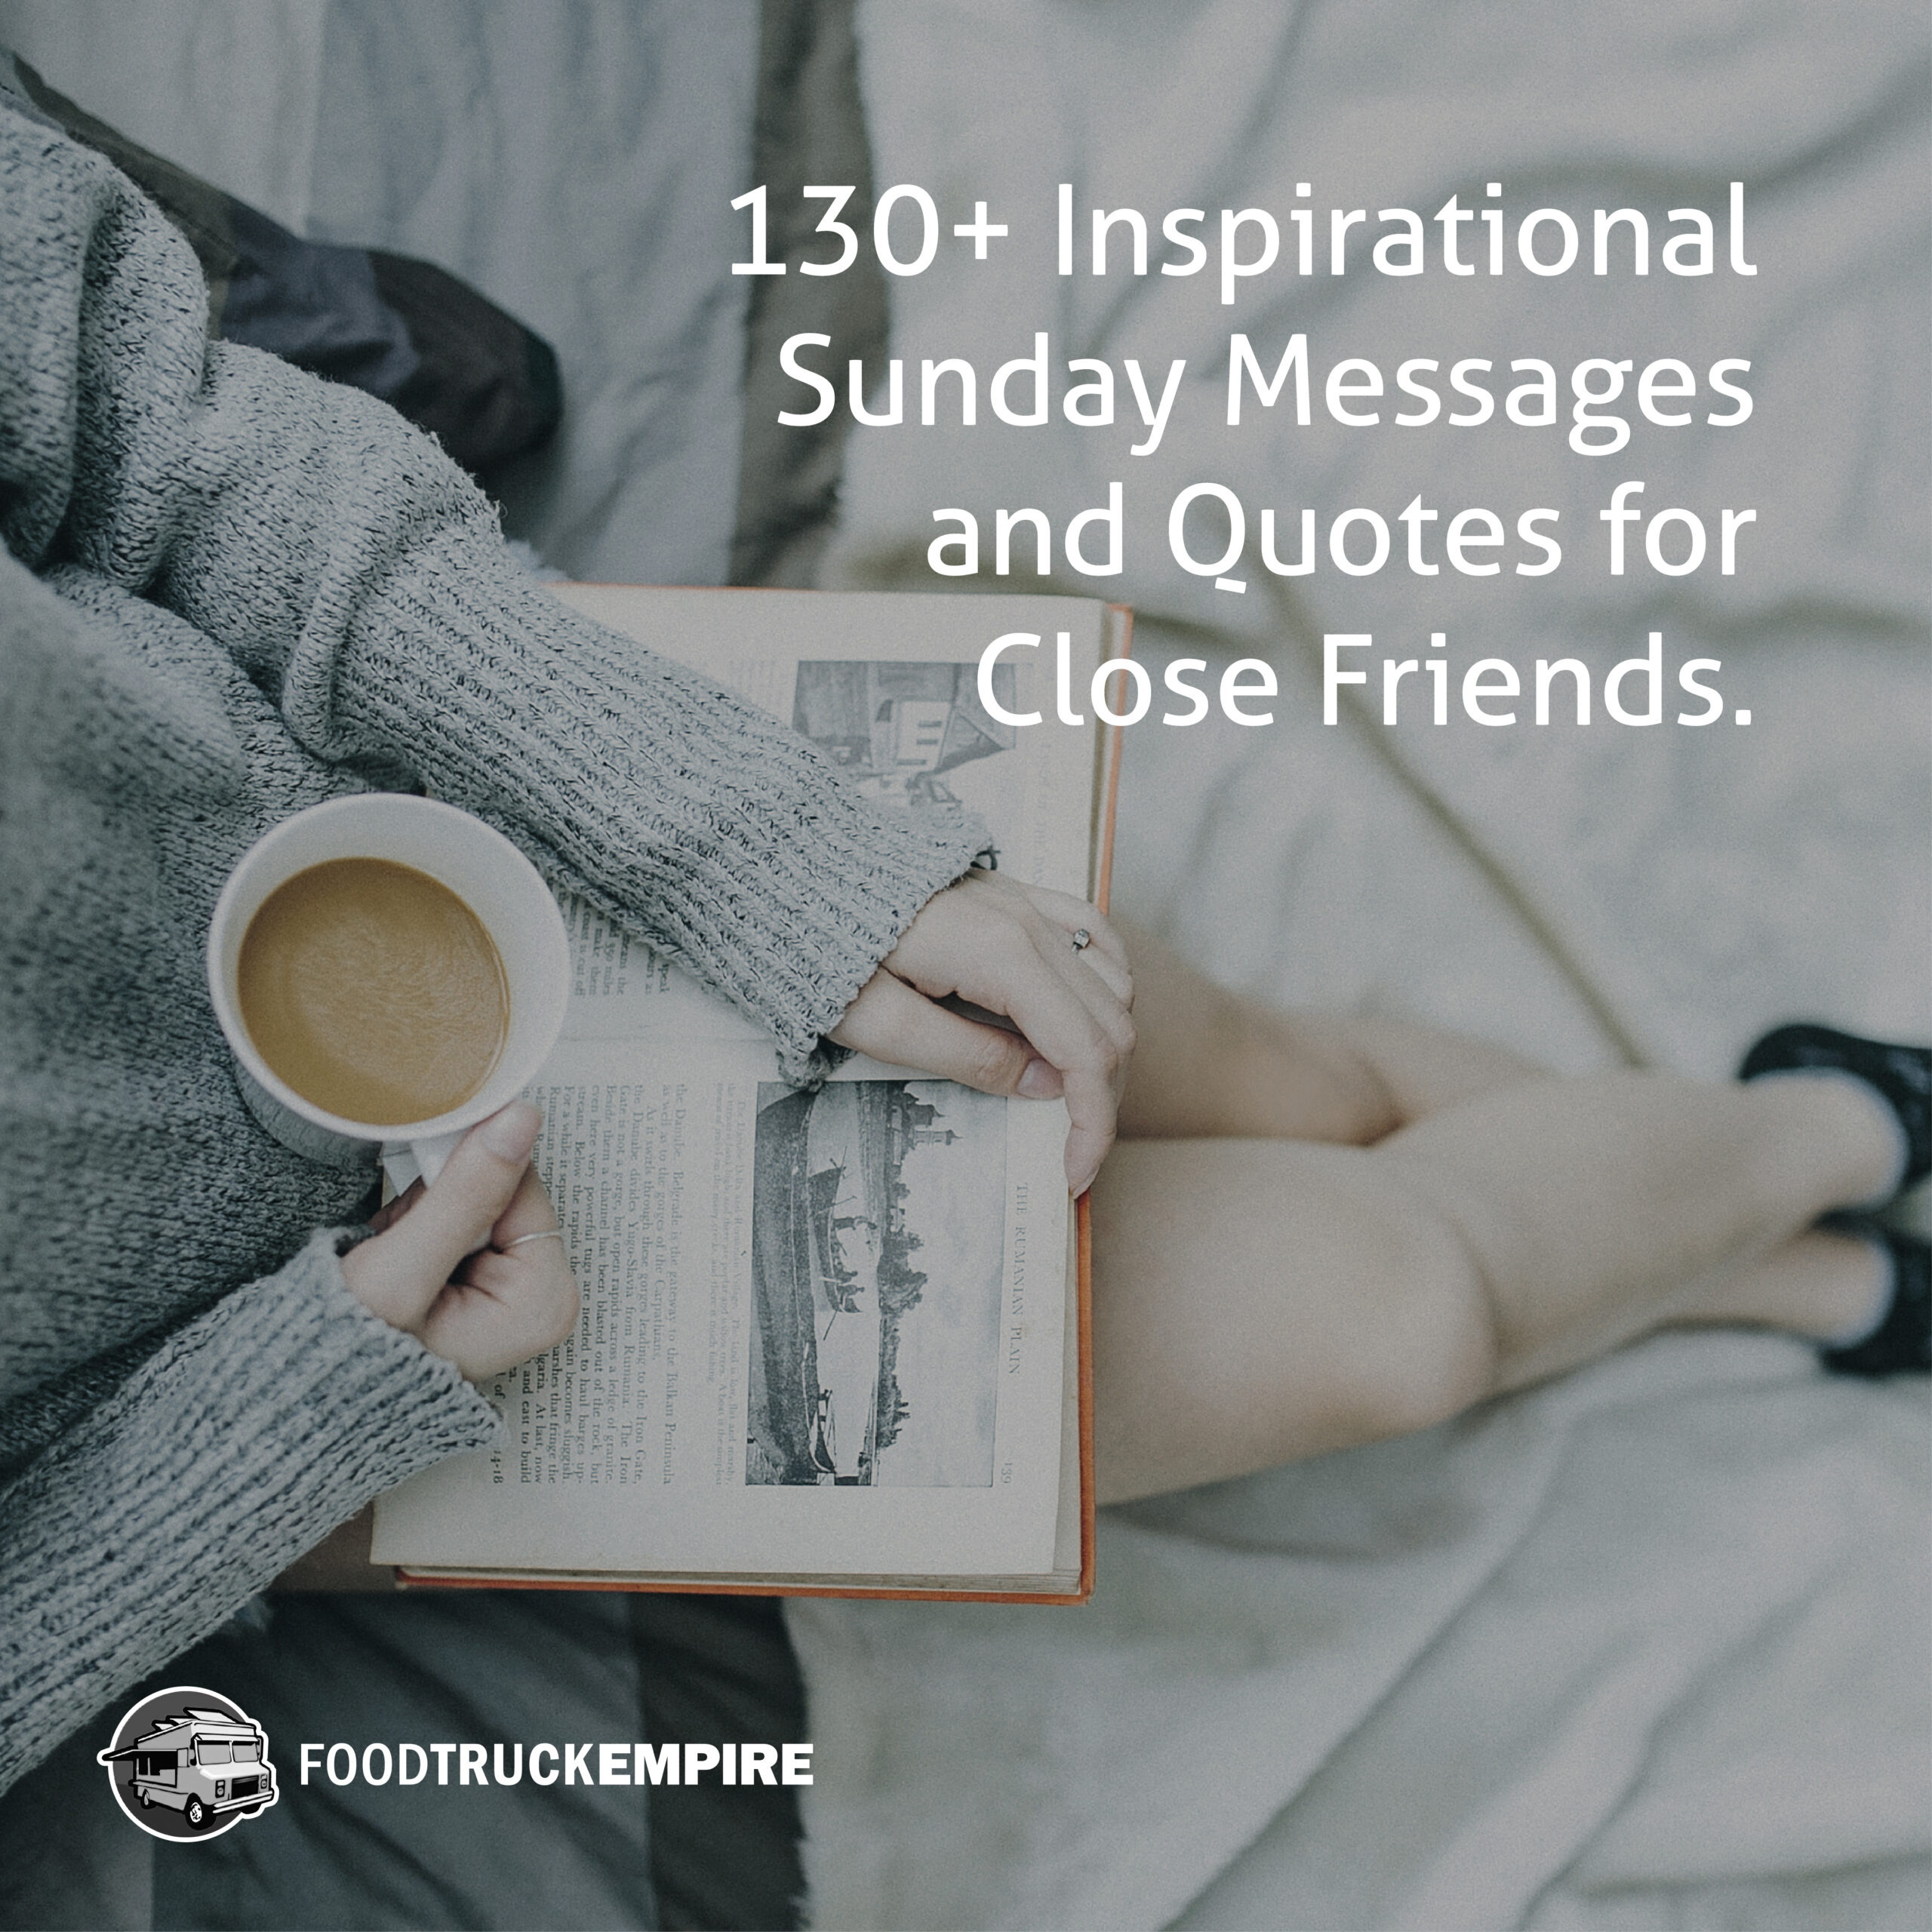 260+ Positive & Inspirational Quotes for Sunday Mornings - DIVEIN